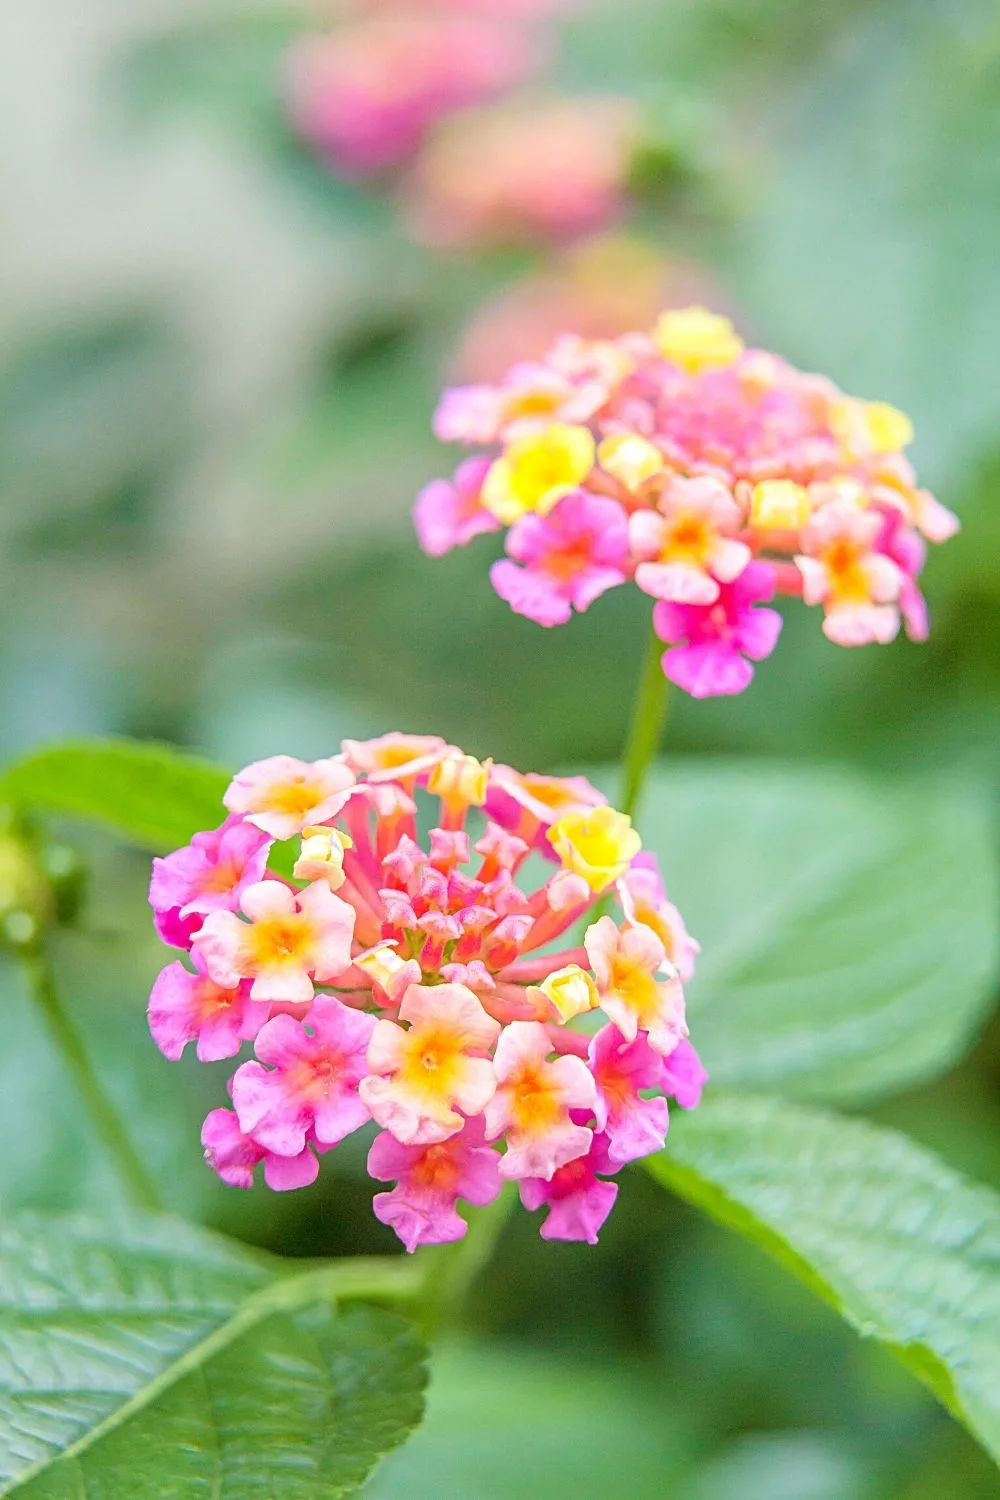 Lantana. though colorful and can be grown on a west-facing balcony, is harmful to your pets